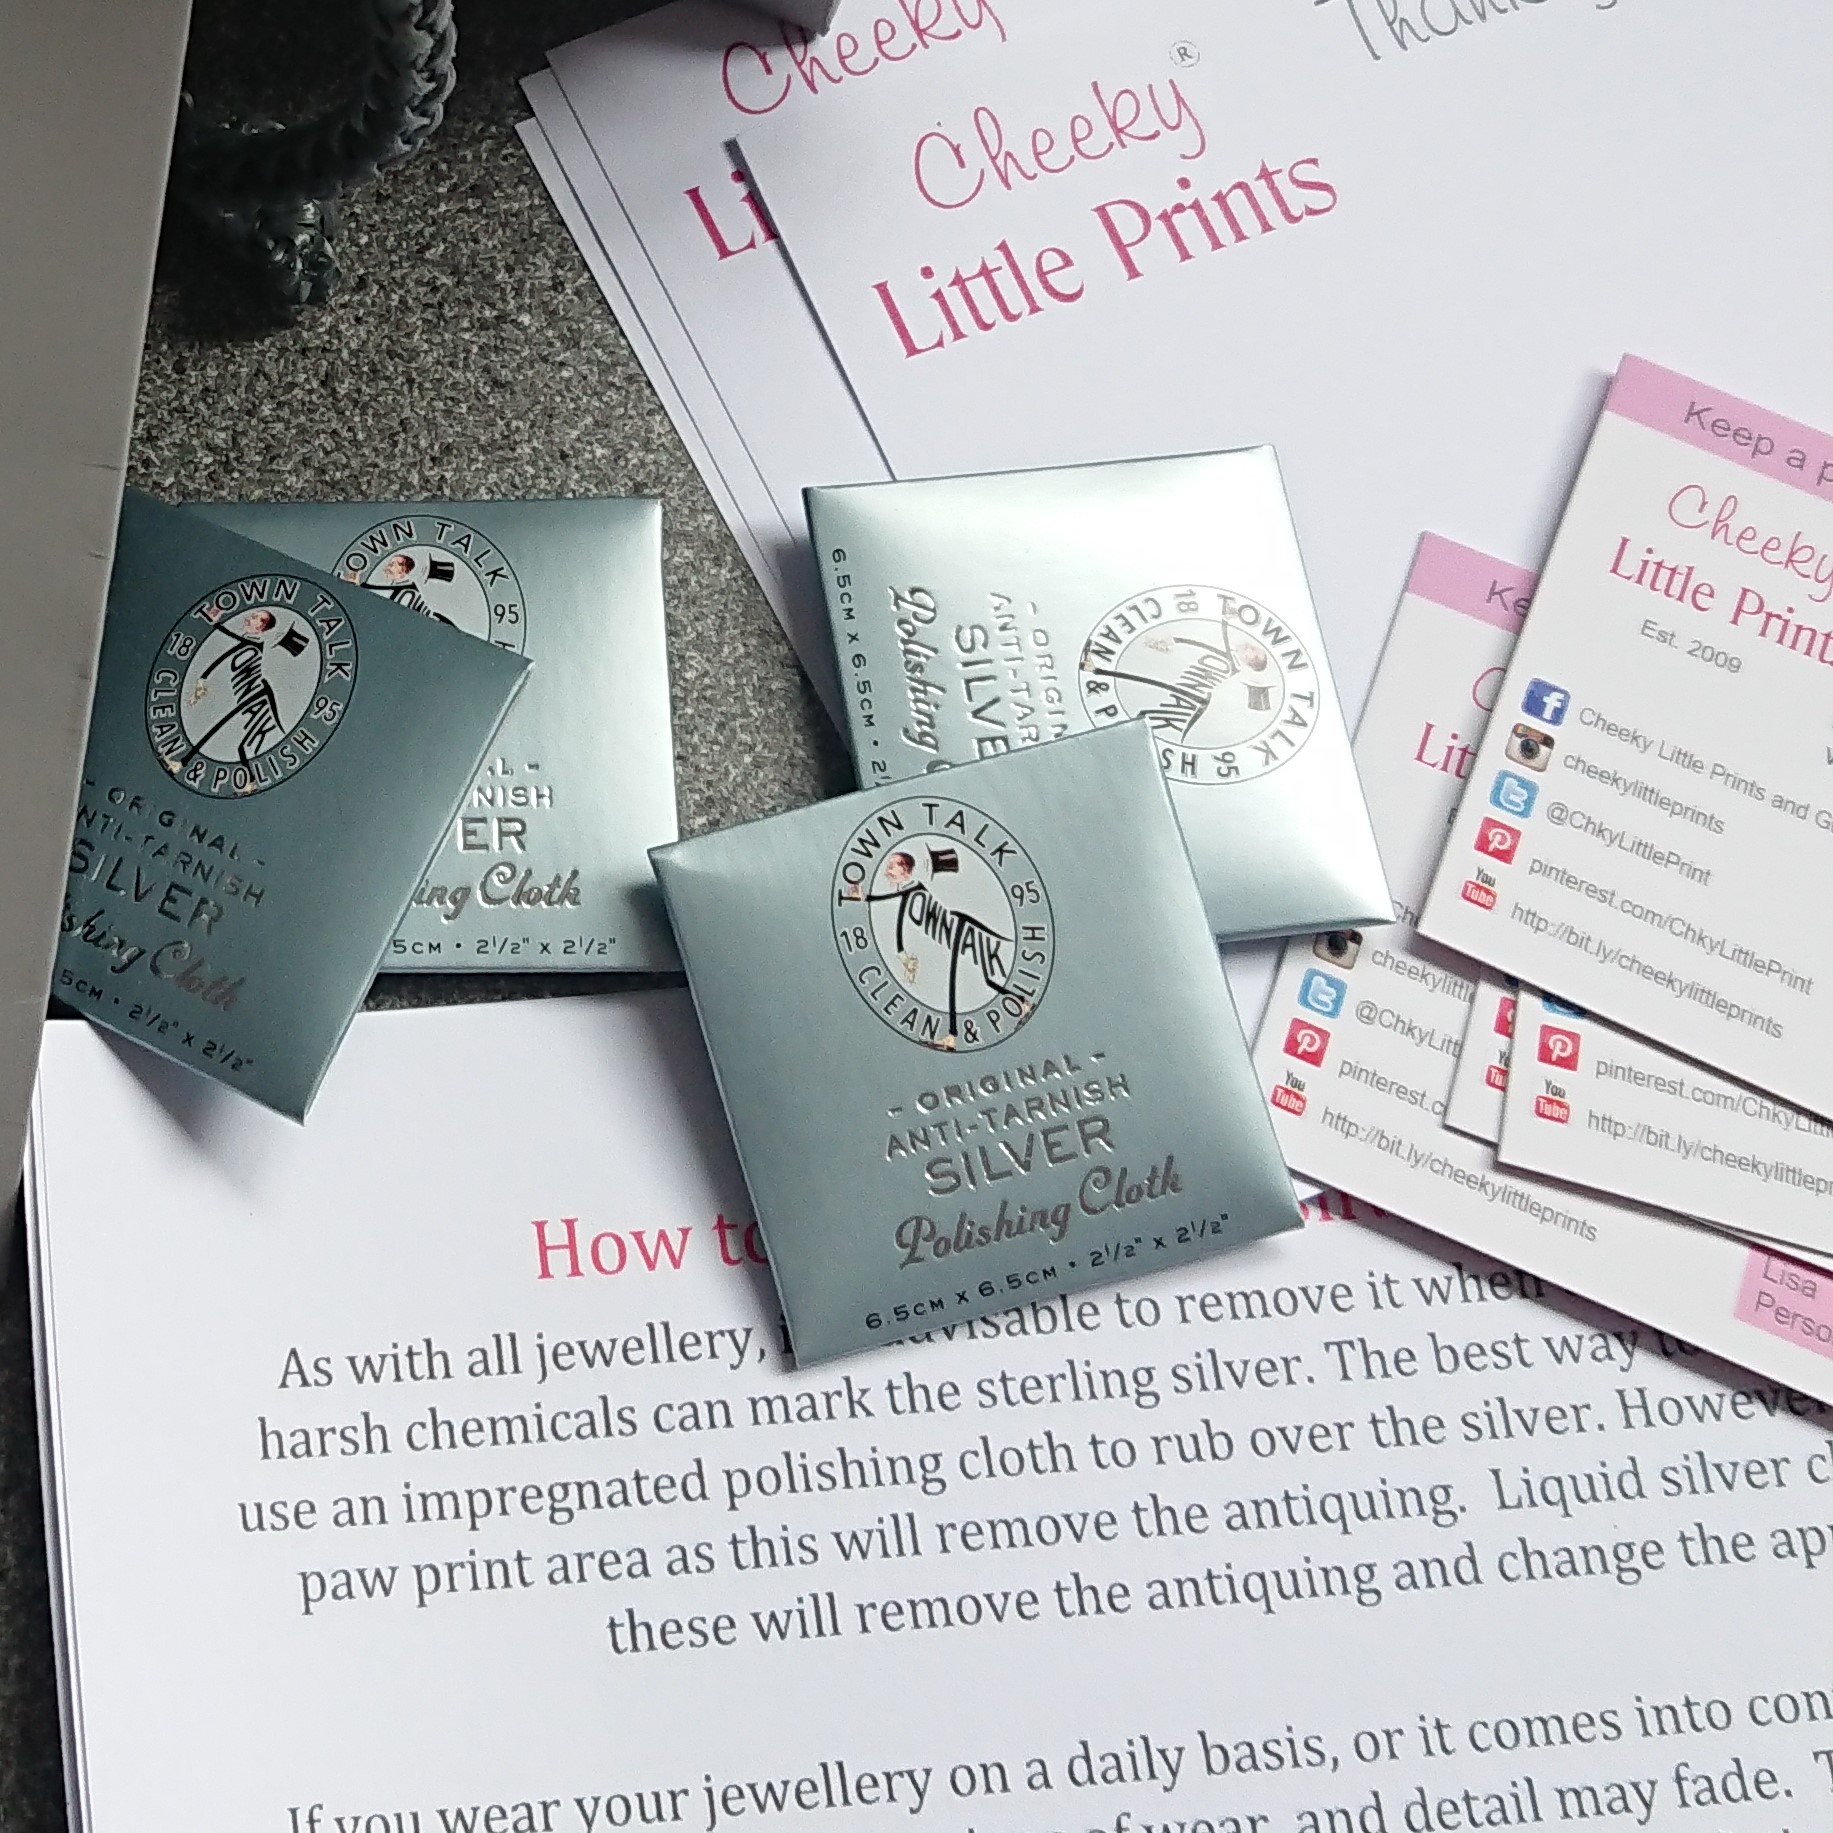 Silver jewellery polishing cloths that accompany every jewellery order at Cheeky Little Prints